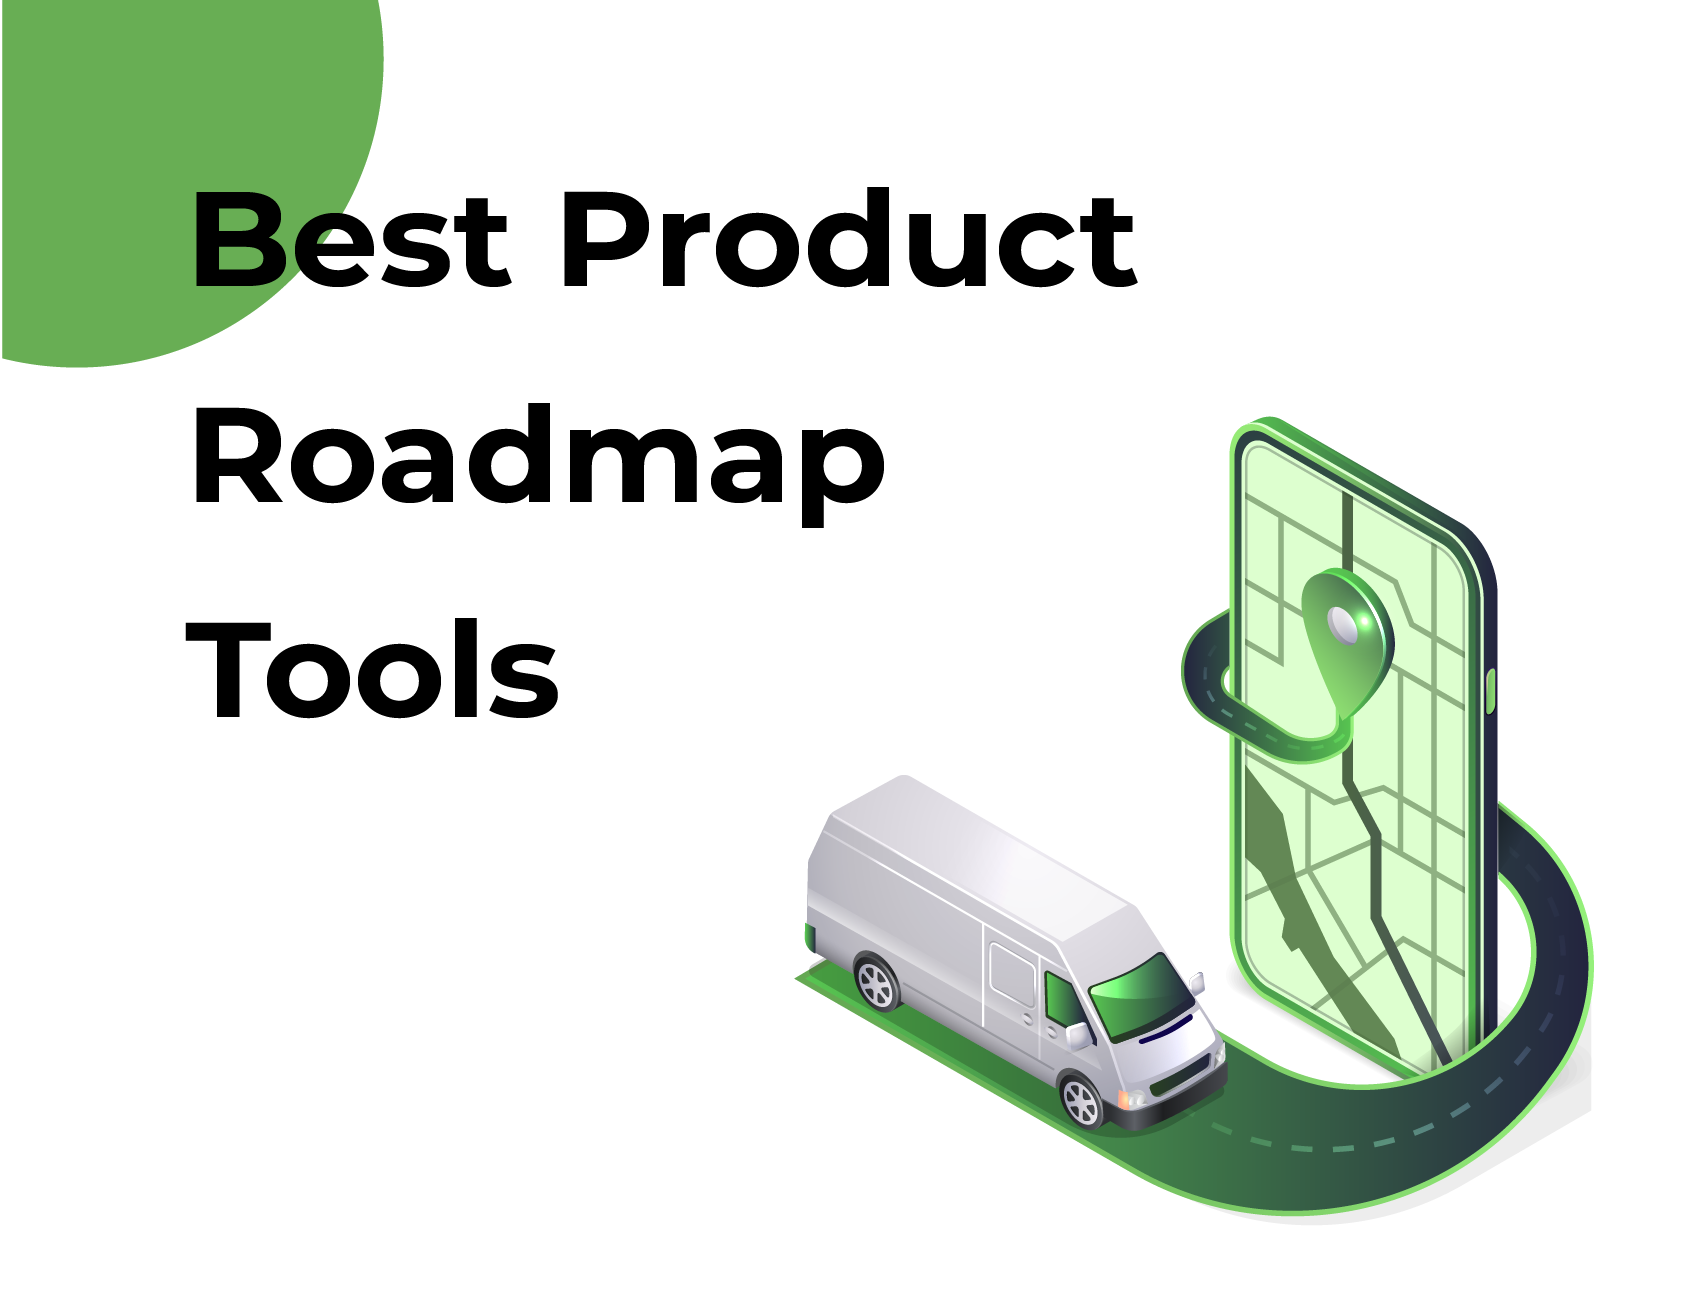 13 Best Roadmap Planning Tools to Achieve Your Goals Faster (Free & Paid)